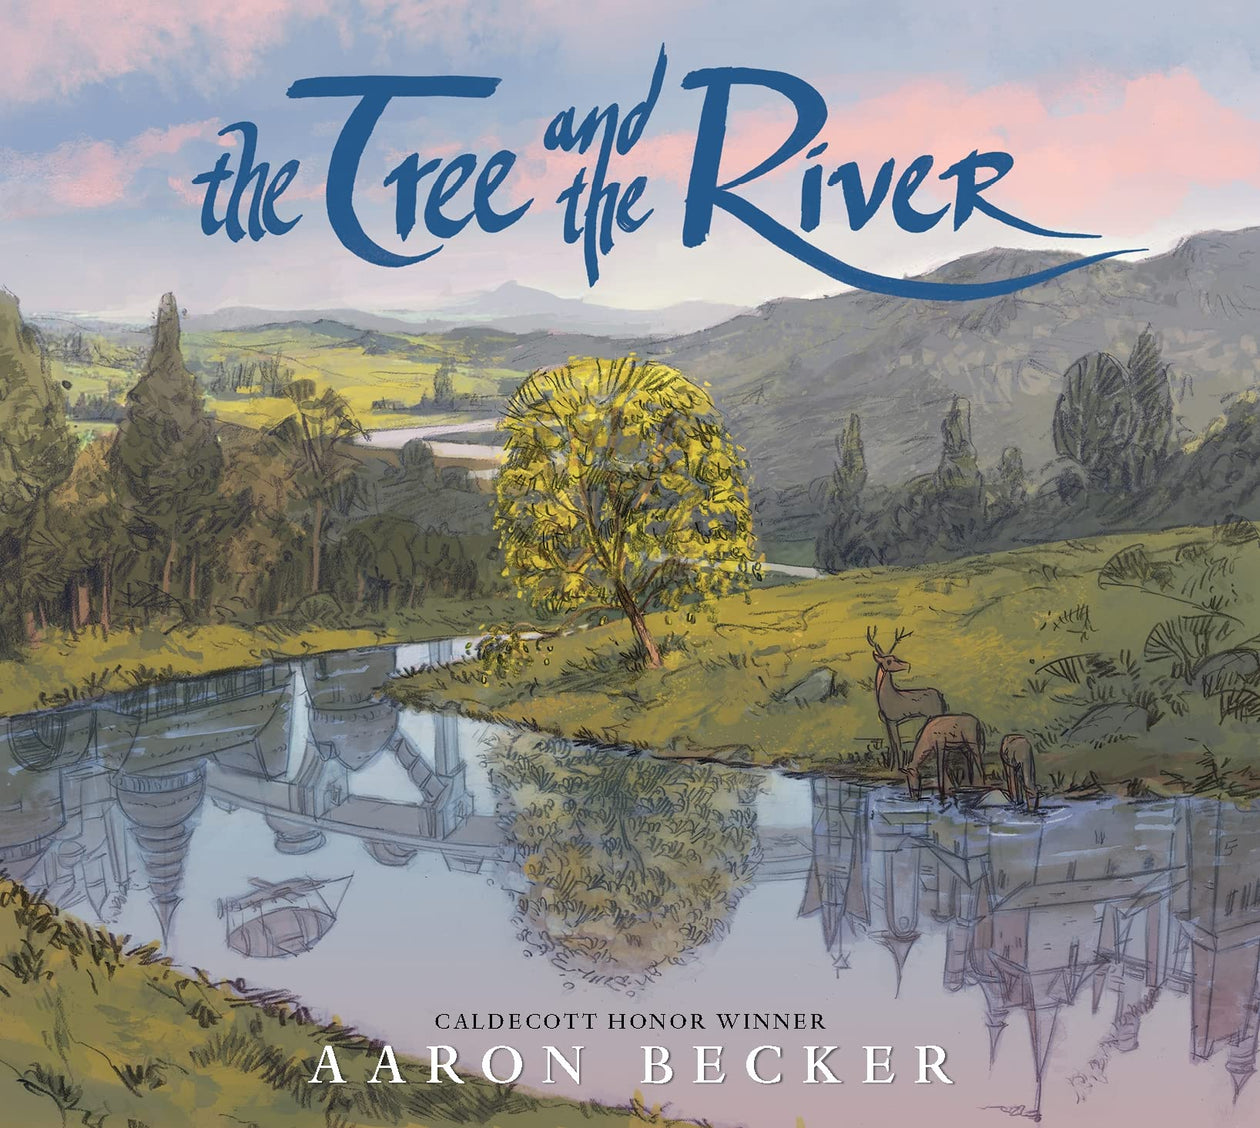 Aaron Becker: The Tree and the River